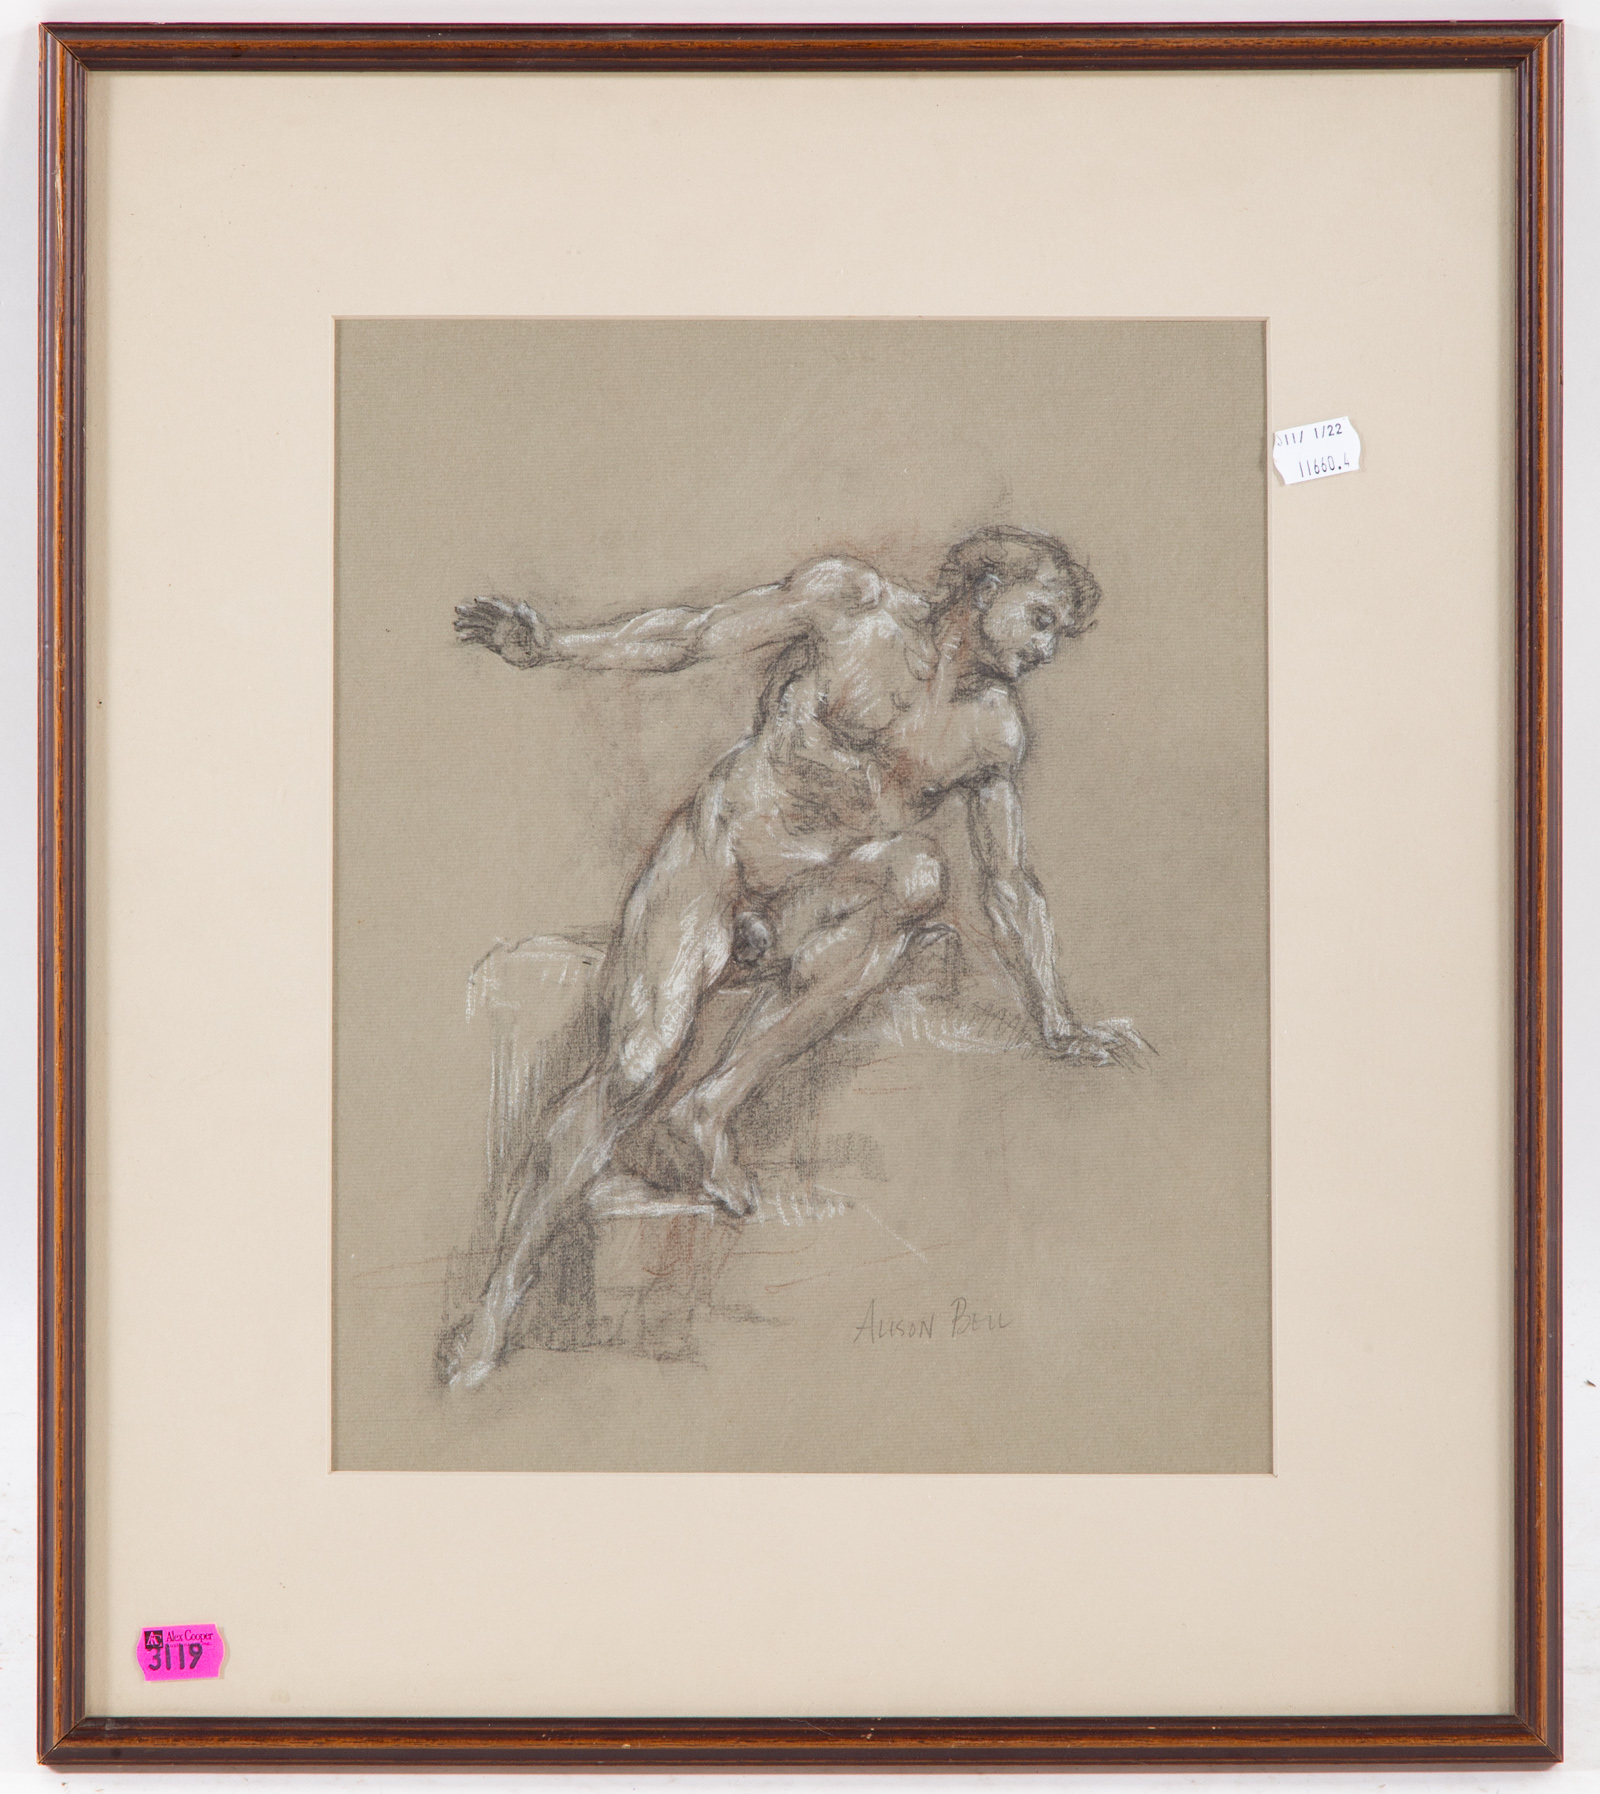 ALISON BELL. STUDY OF A MALE NUDE, CONTE